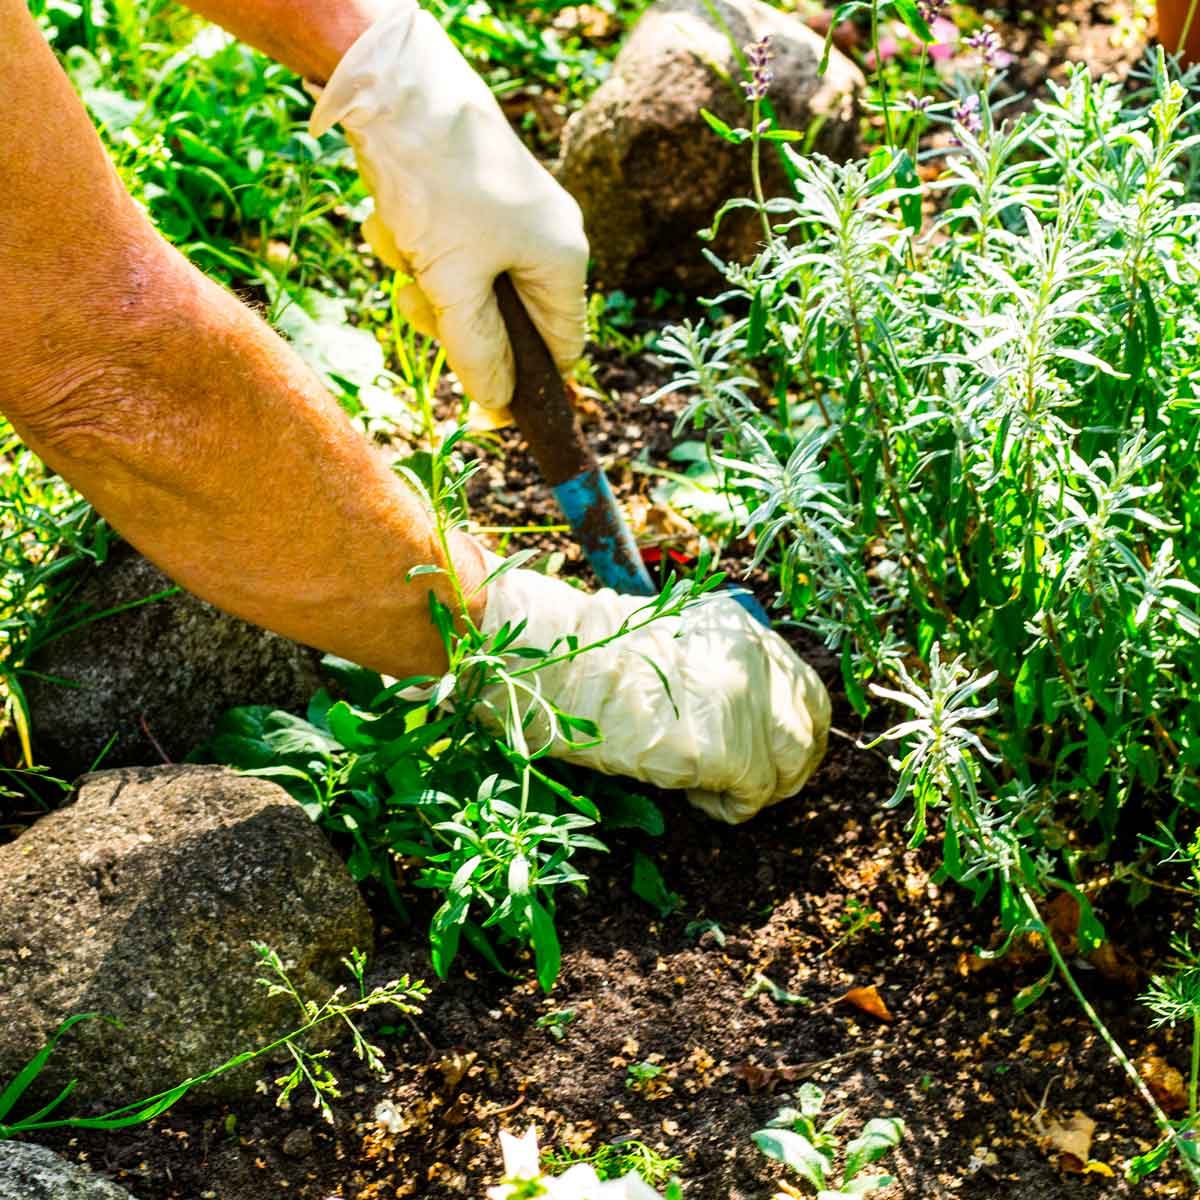 How to Prevent Weeds in Flower Beds